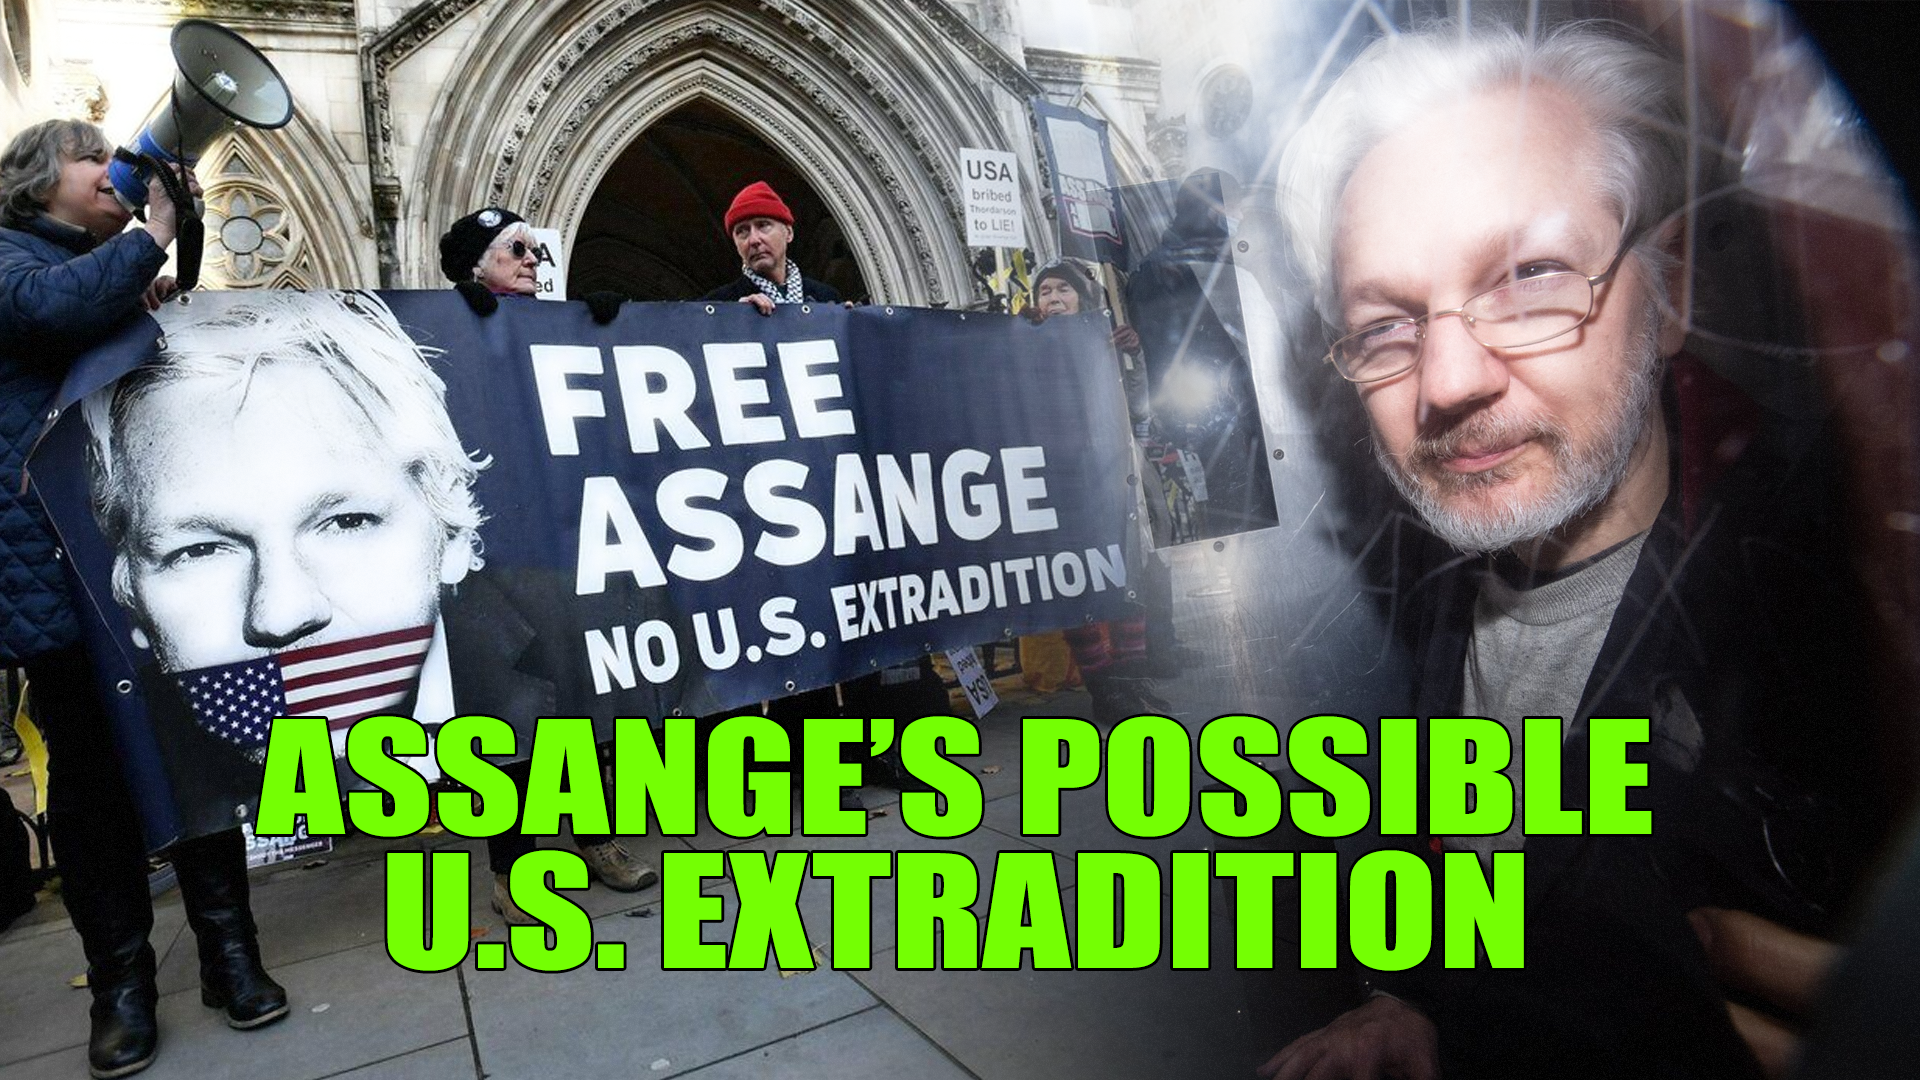 US push to extradite Assange: Is there more to this case?